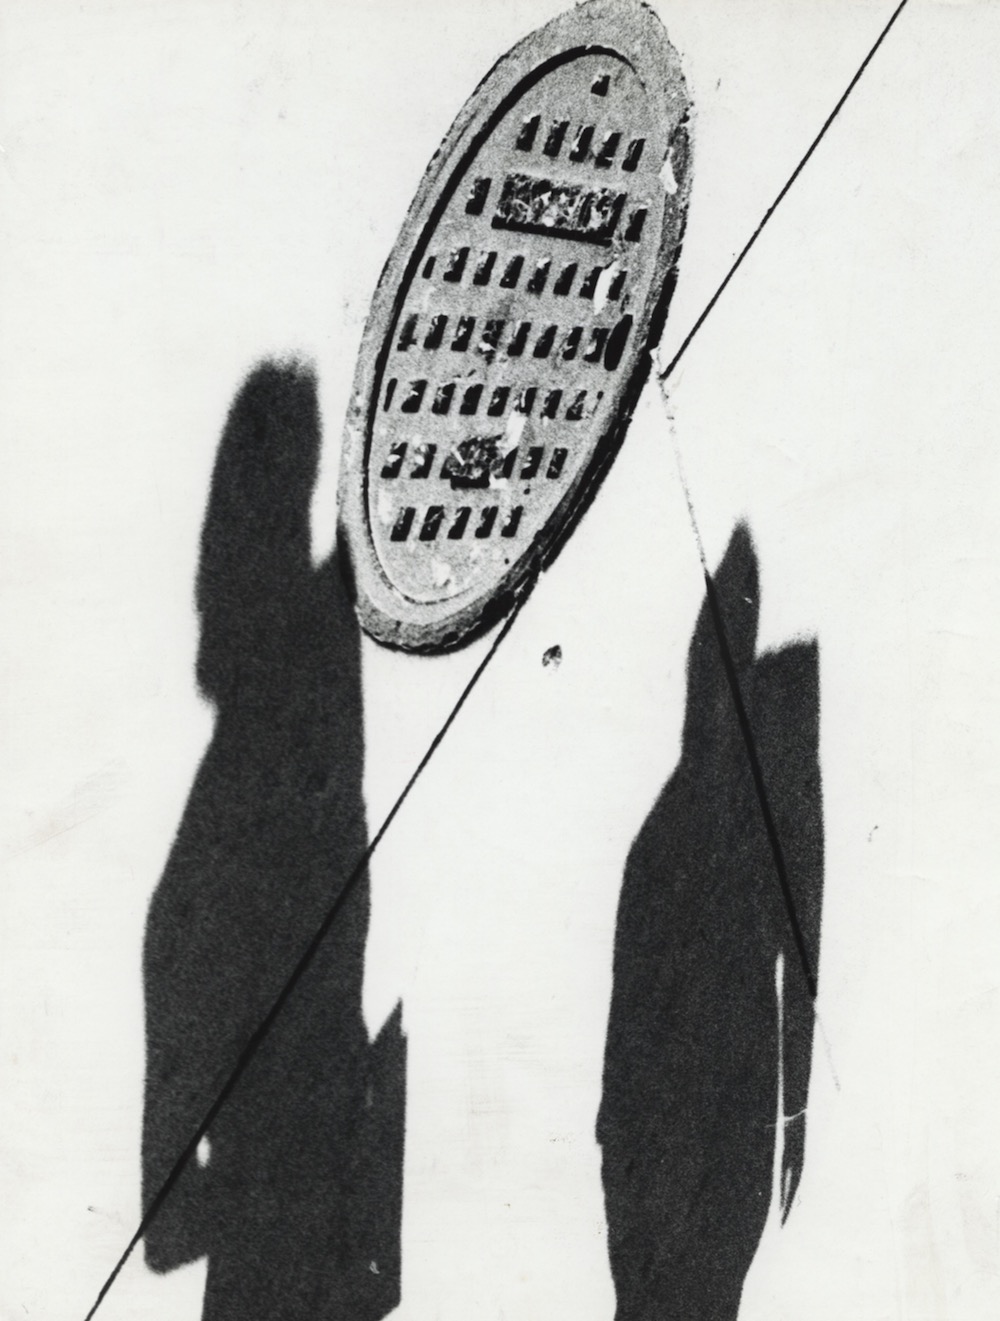 Two Men with Manhole Cover, Shadow Series, Chicago, 1951